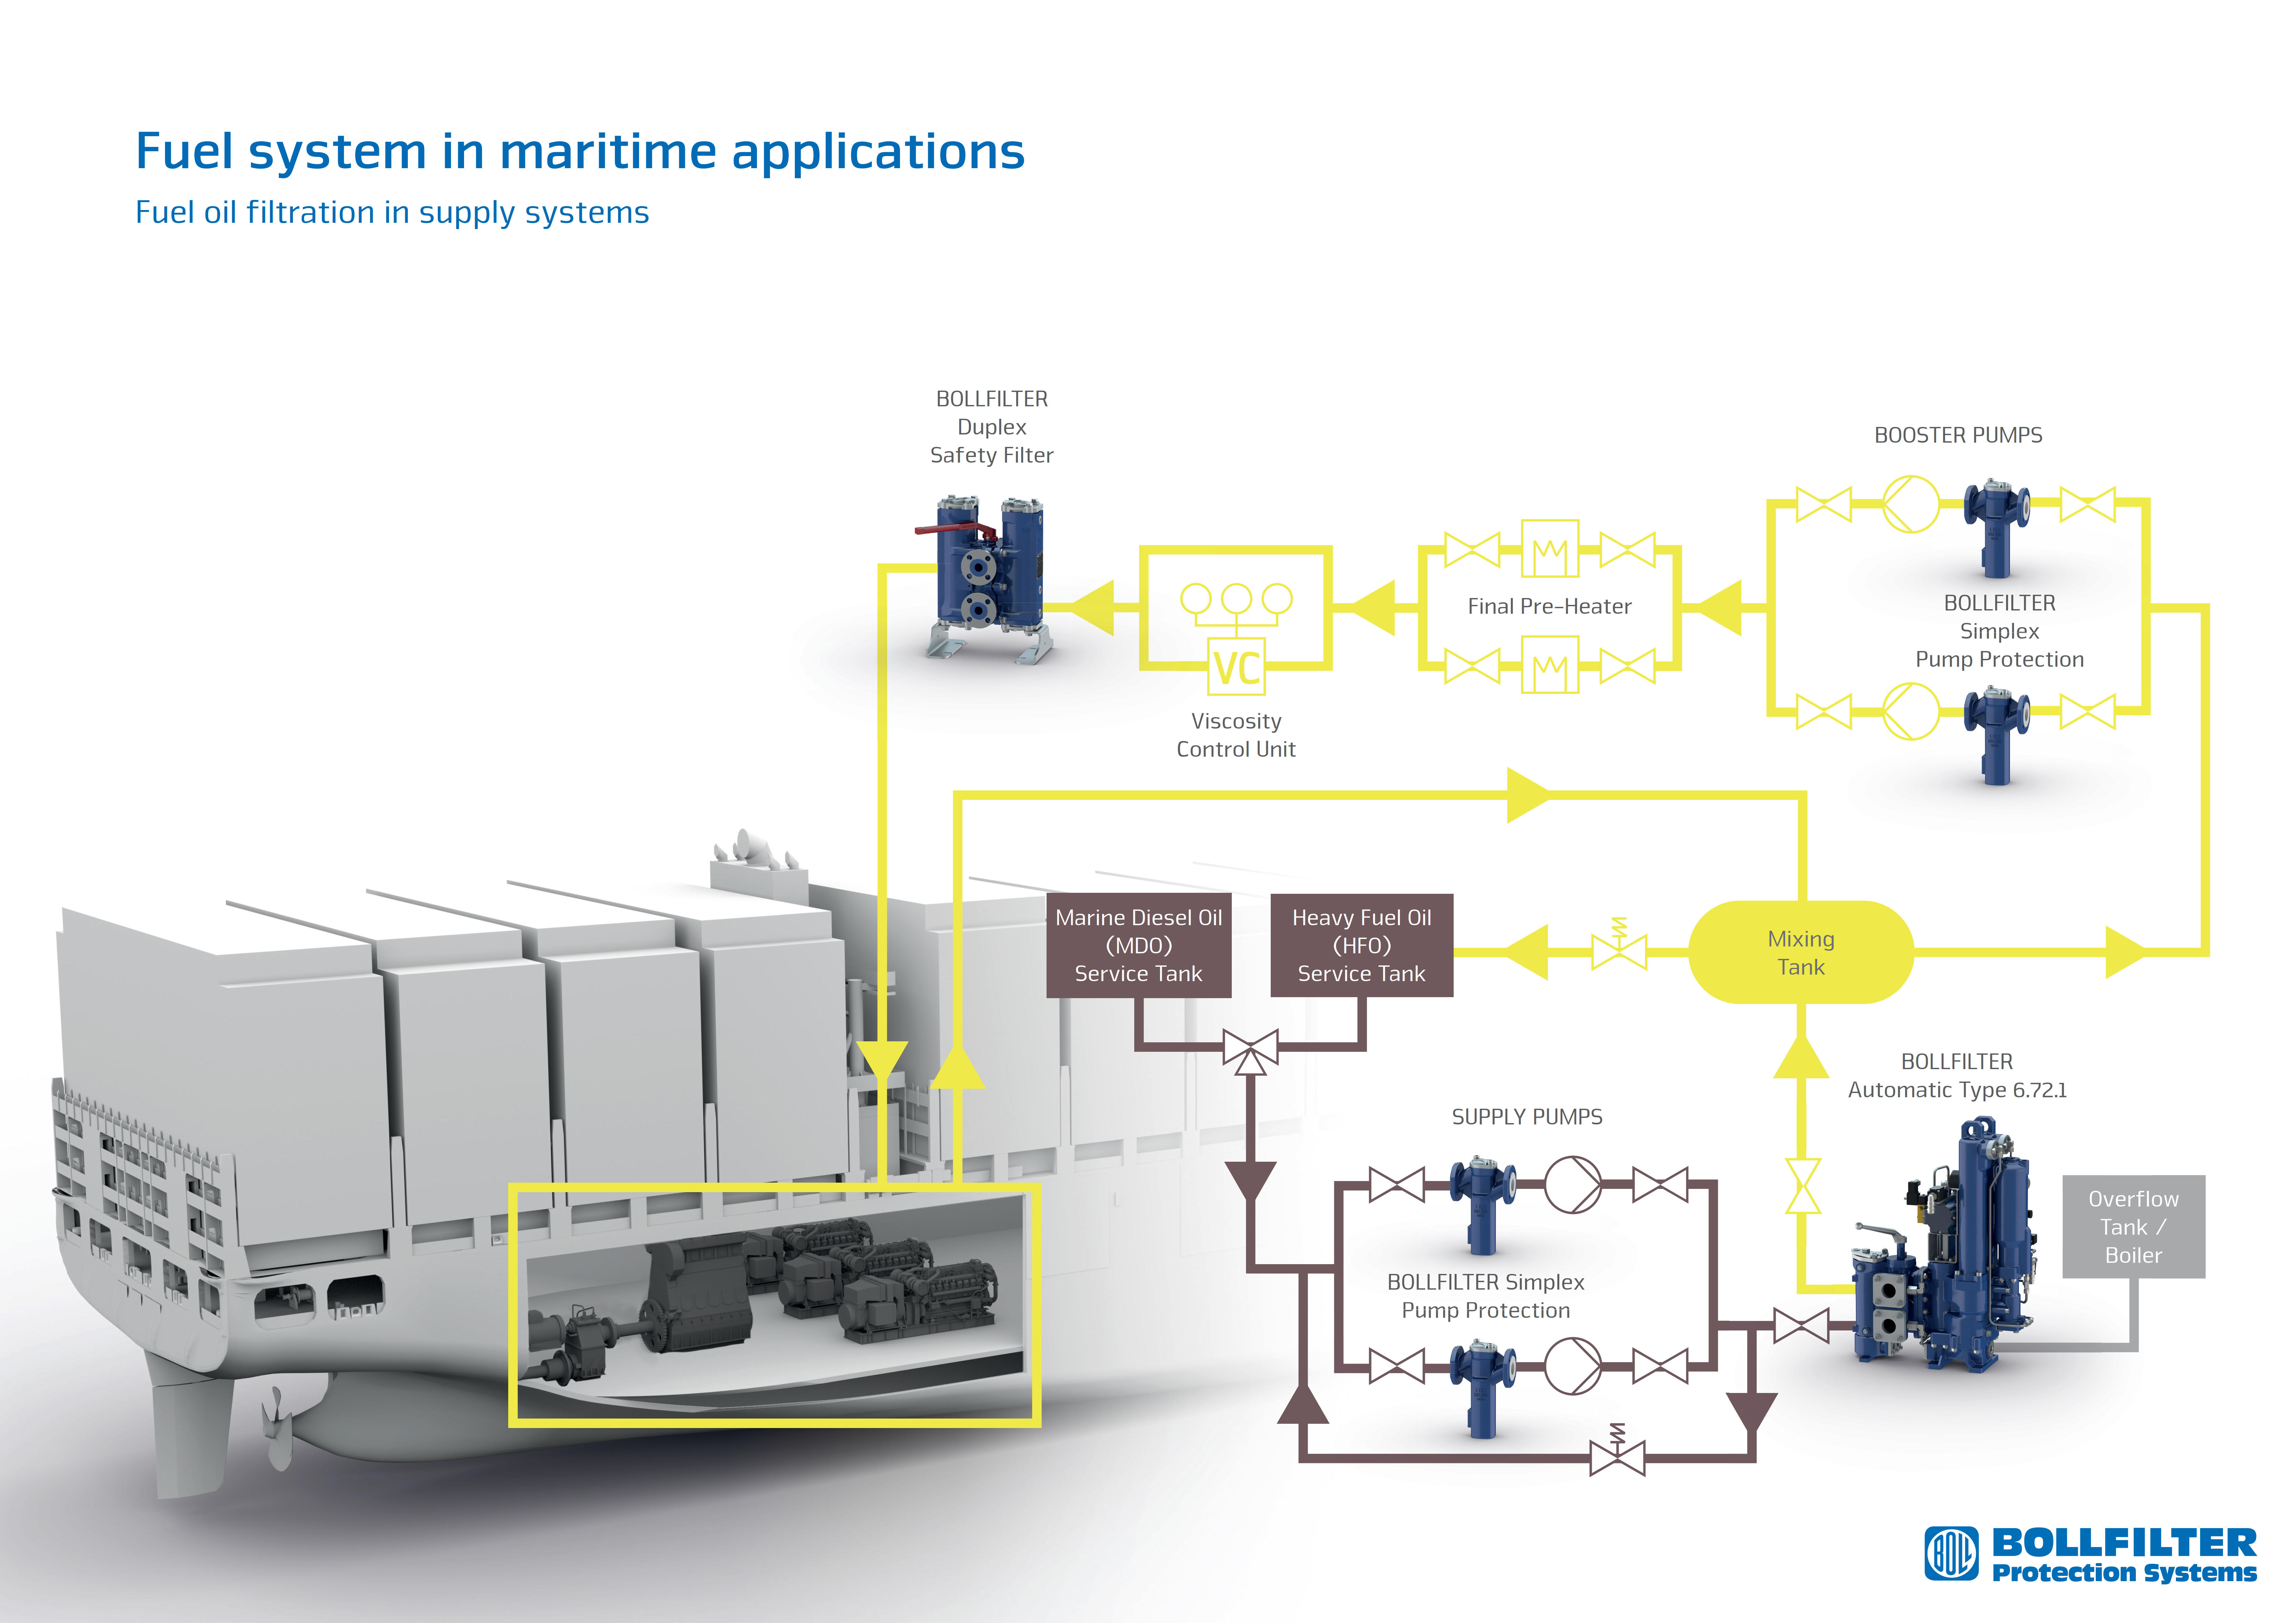 Fuel system in maritime supply system